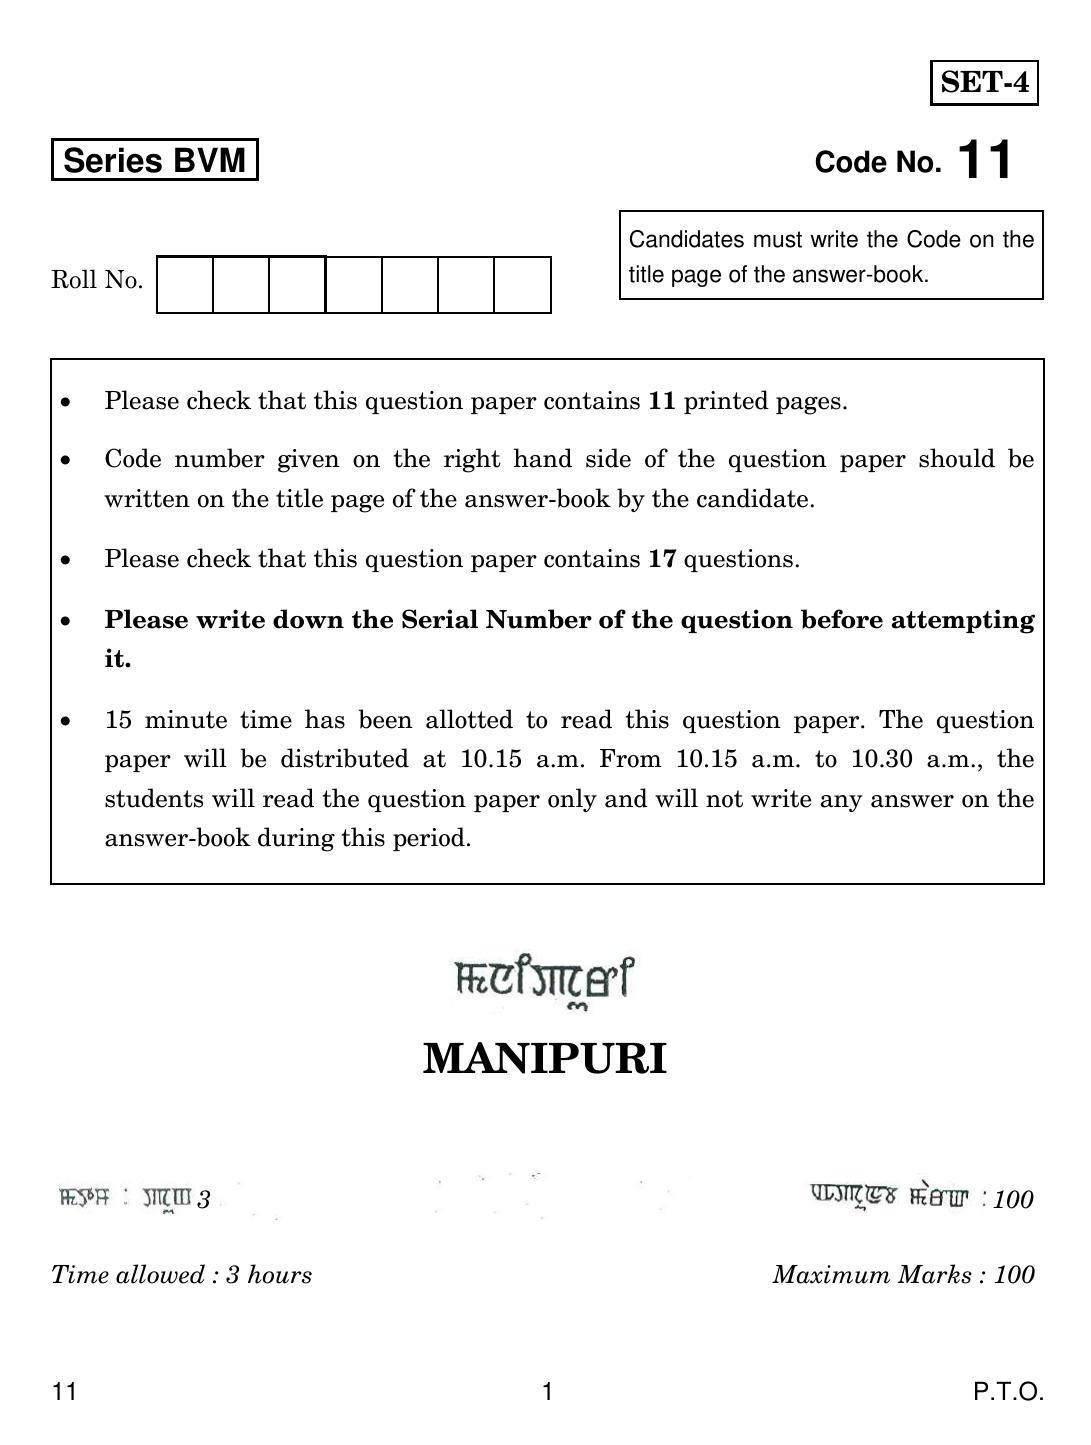 CBSE Class 12 11 Manipuri_compressed 2019 Question Paper - Page 1